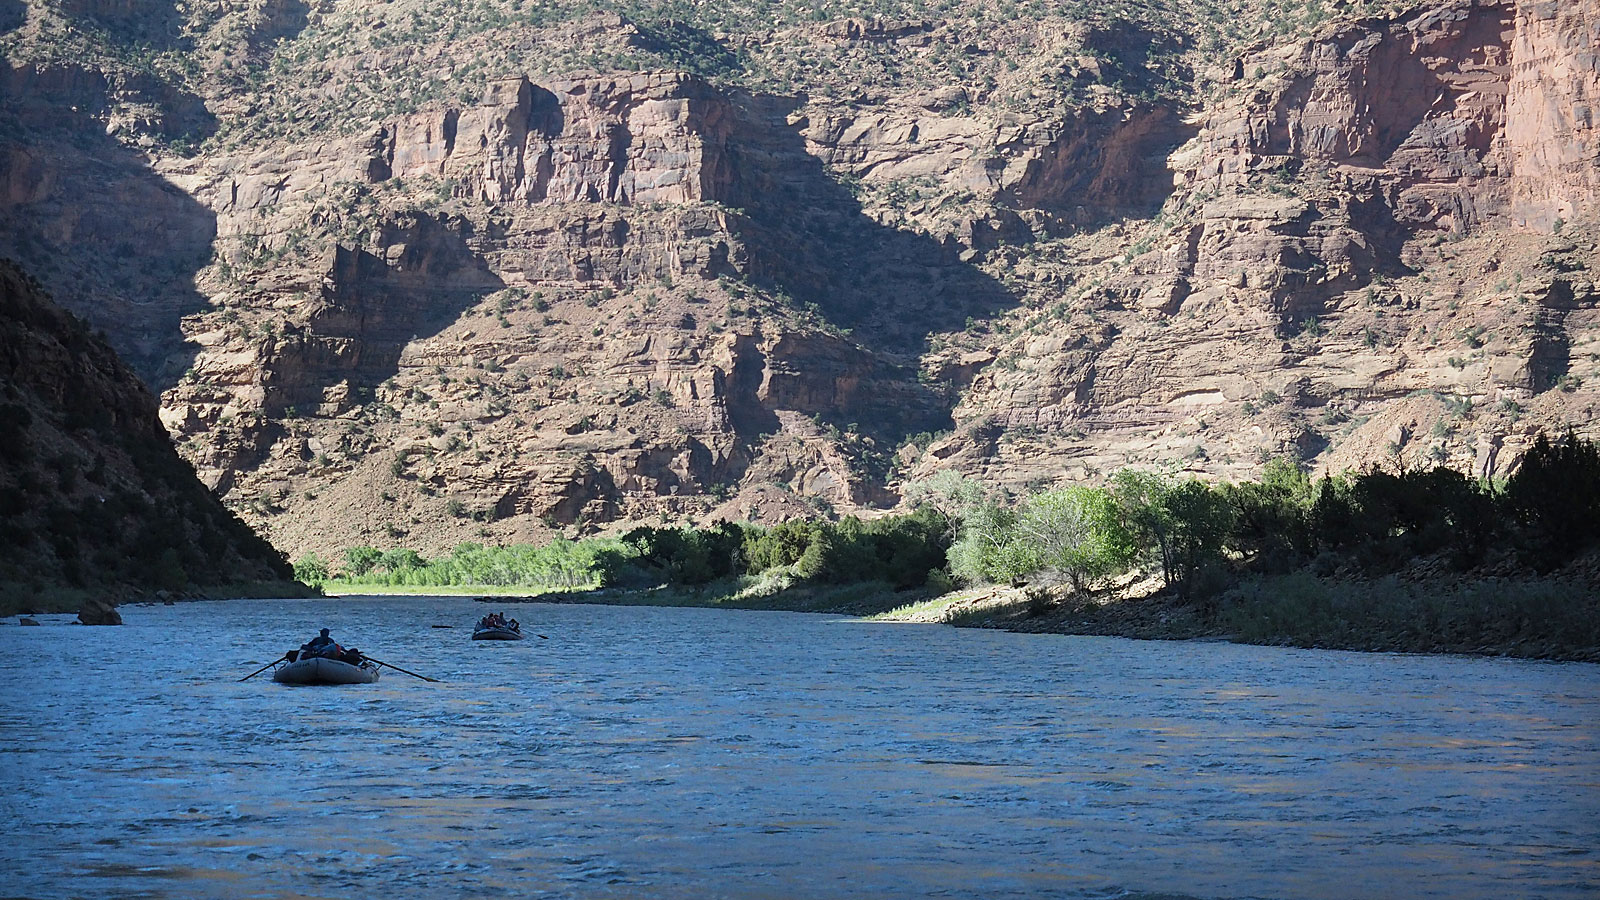 Rafts floating on the Green River in Desolation Canyon in Utah during a whitewater rafting trip with ARTA River Trips